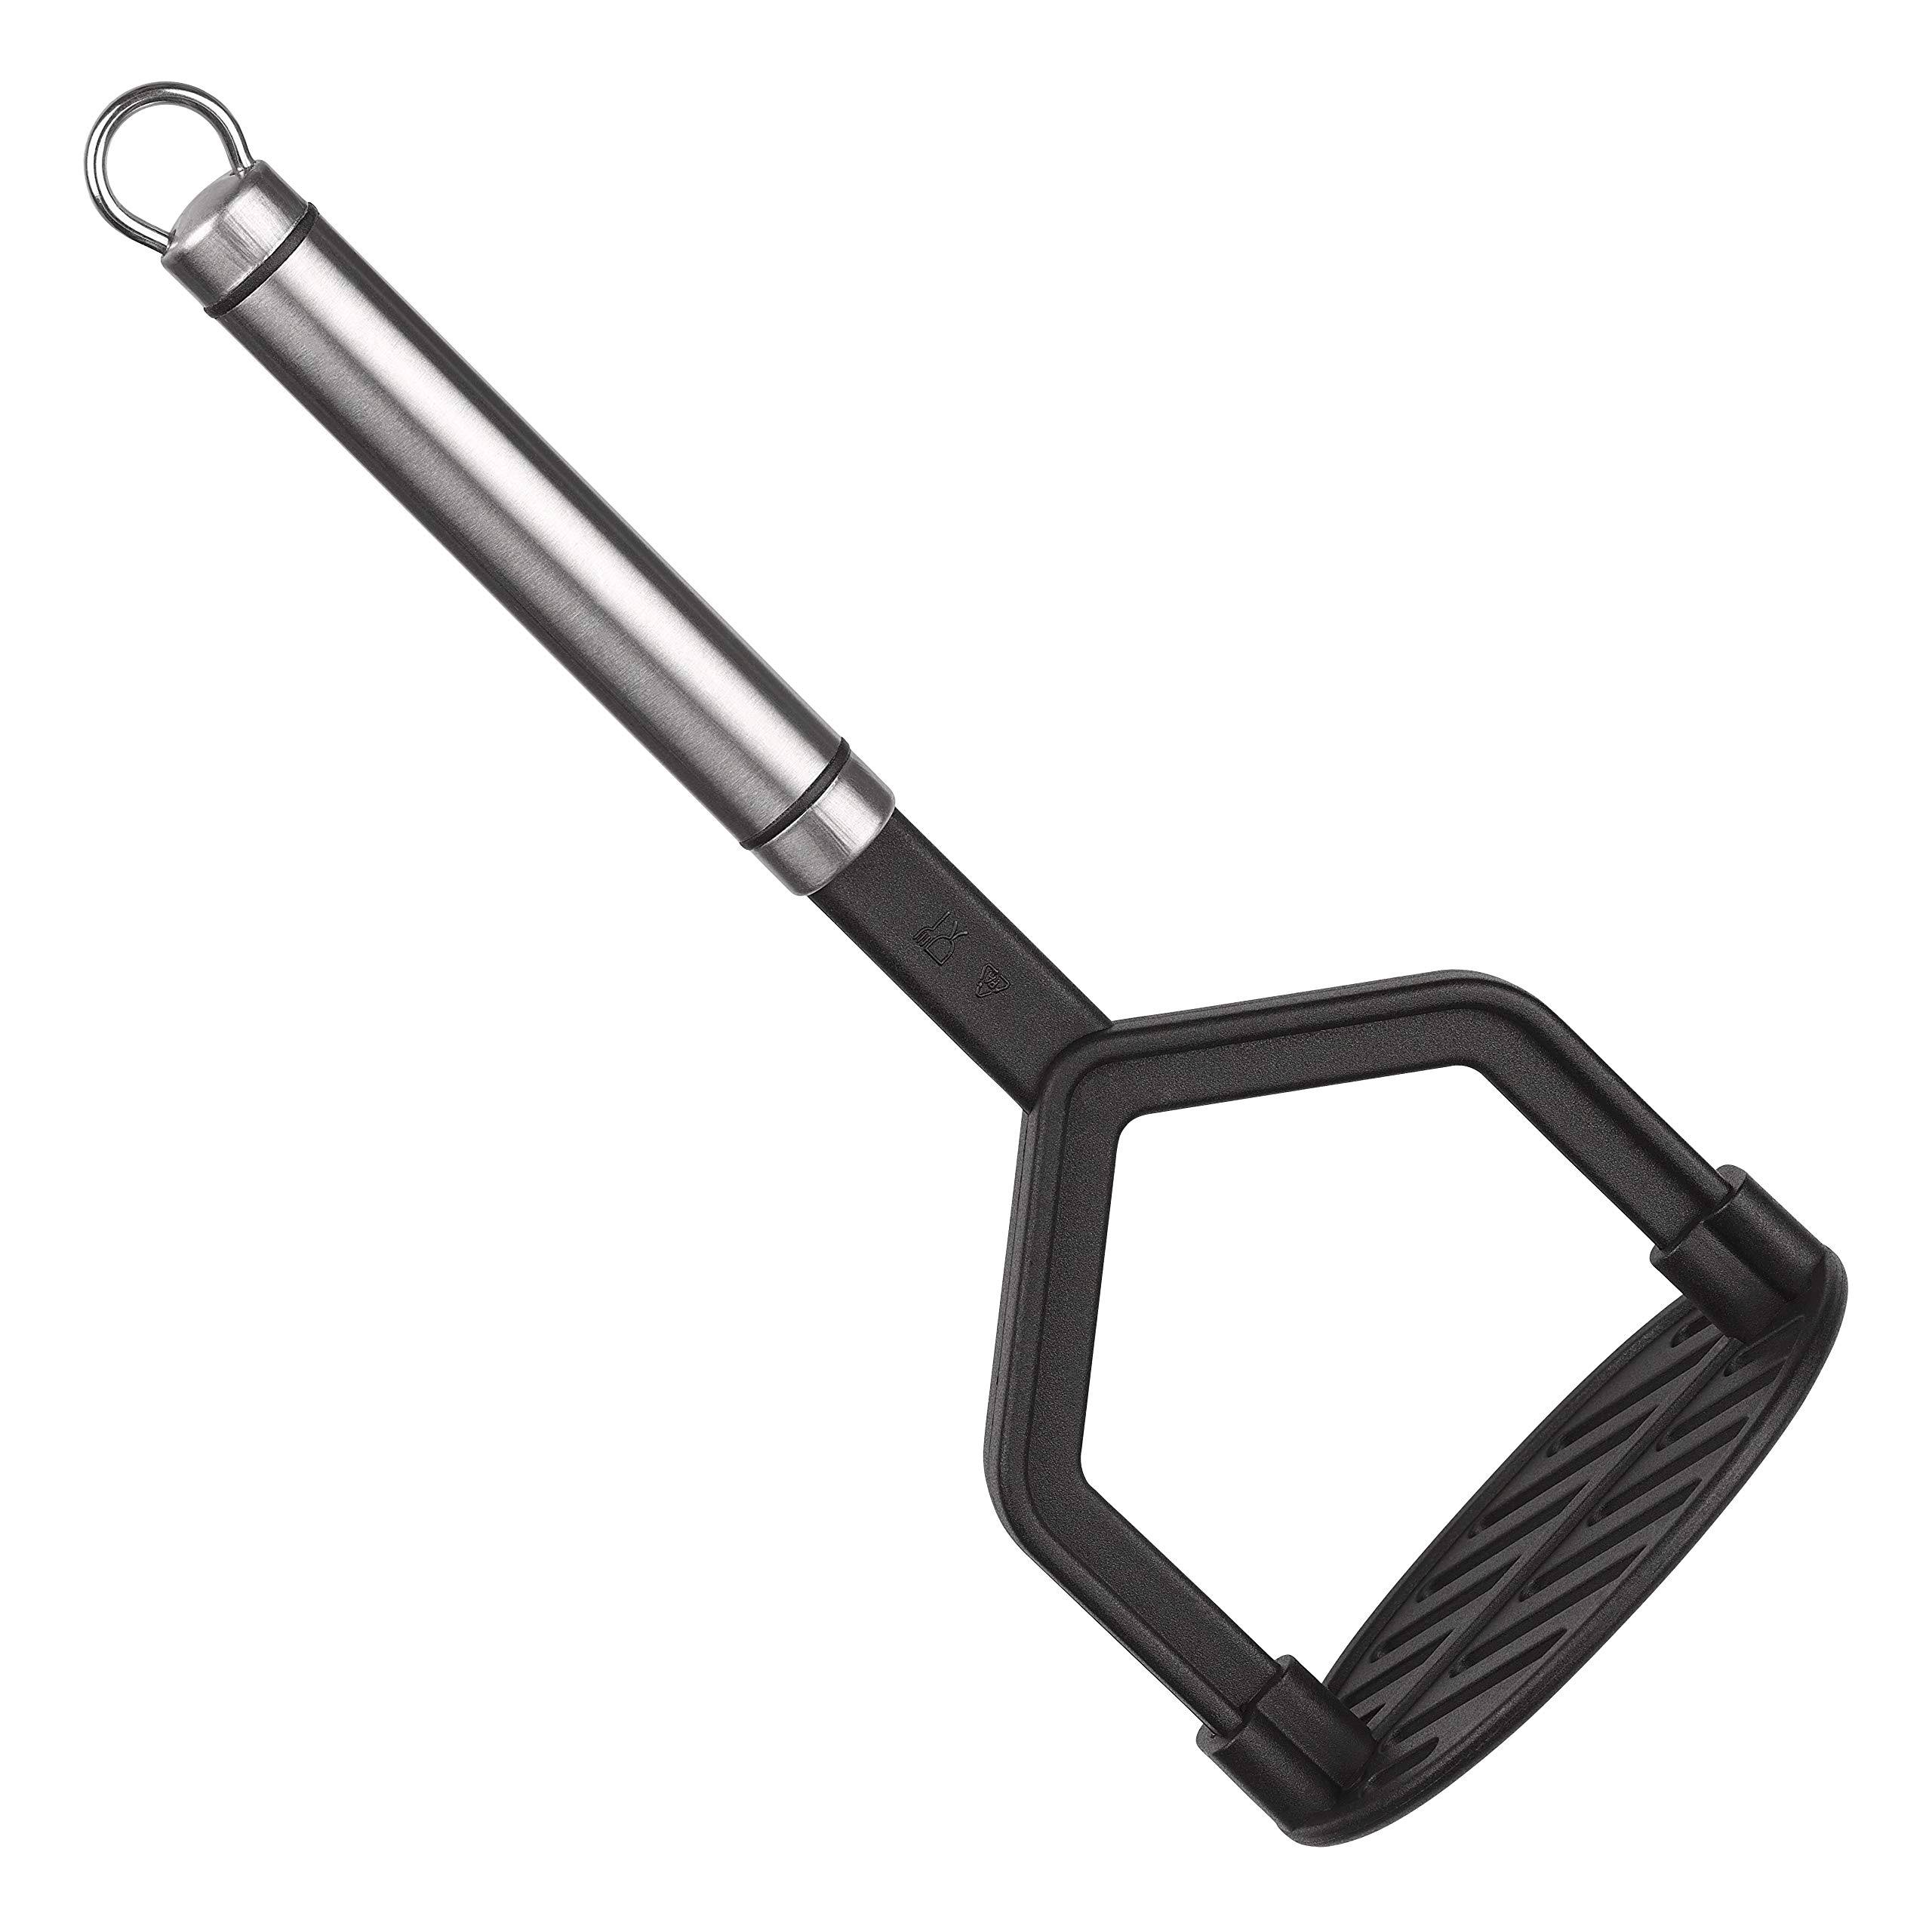 Tala Nylon Masher with Stainless Steel Handle, Ideal for Use with Non-Stick Kitchenware